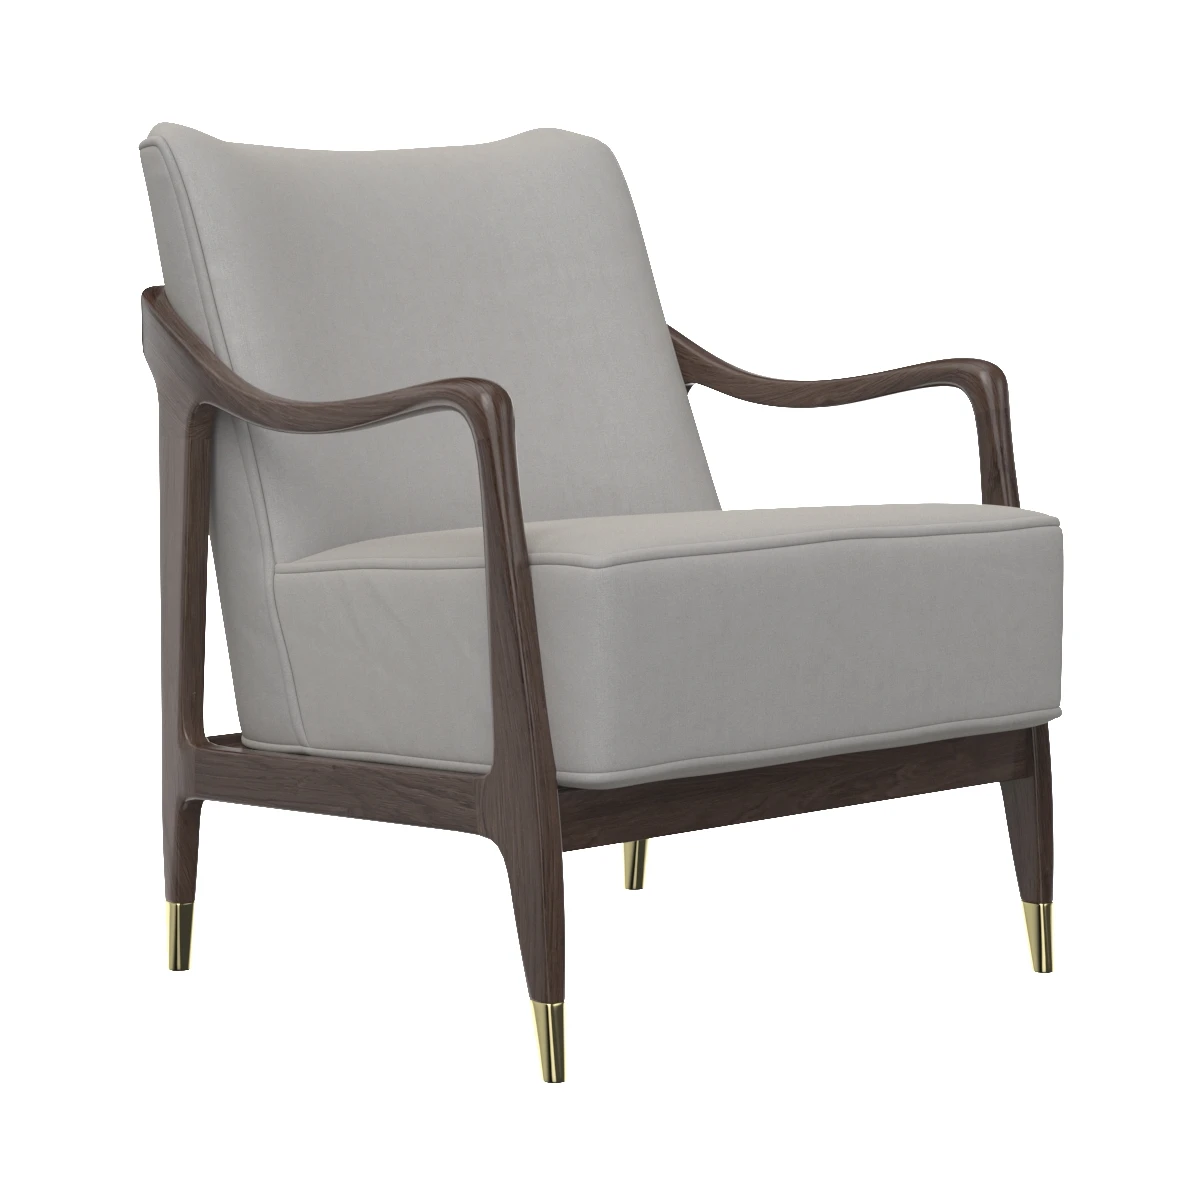 Midcentury Sculptural Gio Ponti Style Walnut Lounge Chair 3D Model_01